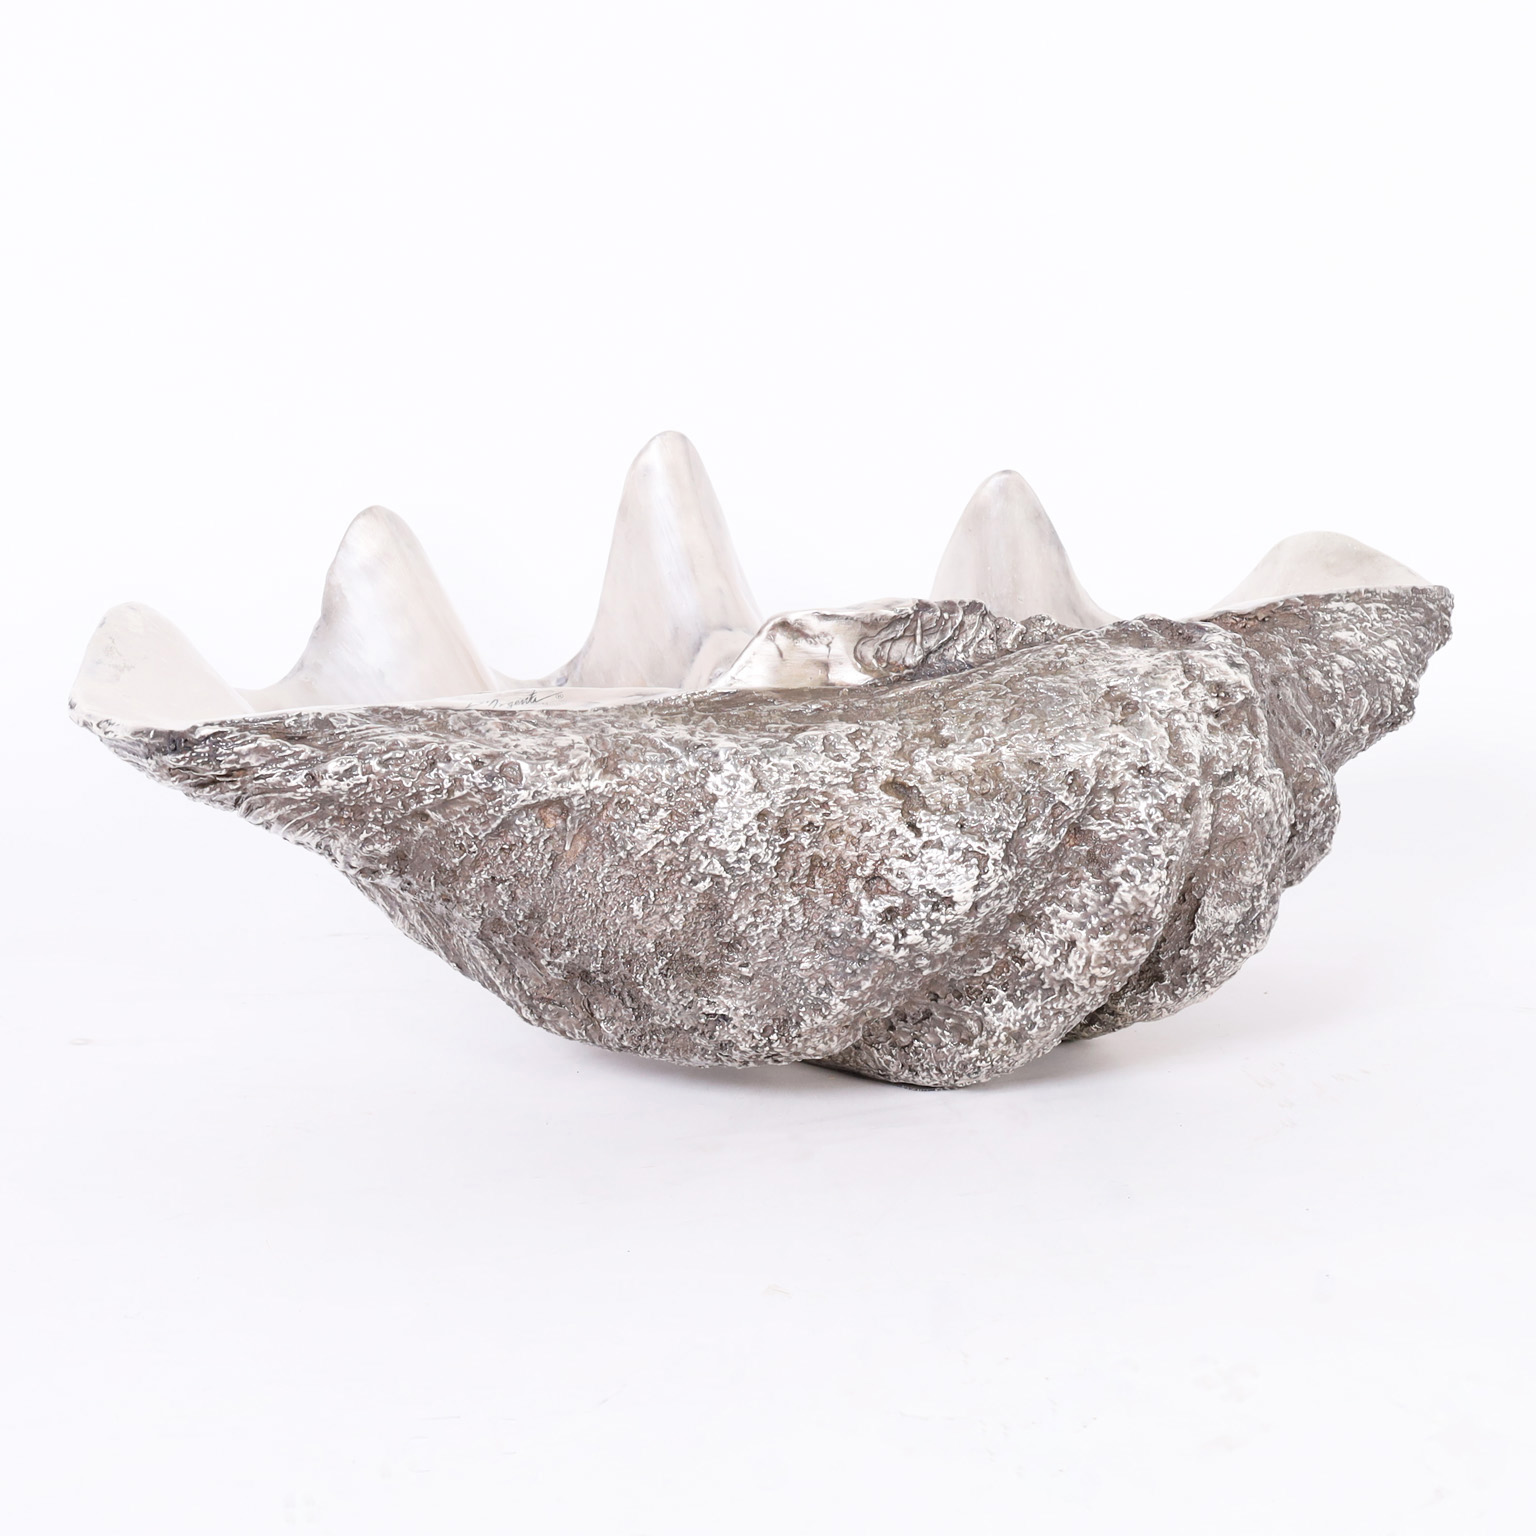 Silver Plate Life Size Giant Clam Shell Sculpture